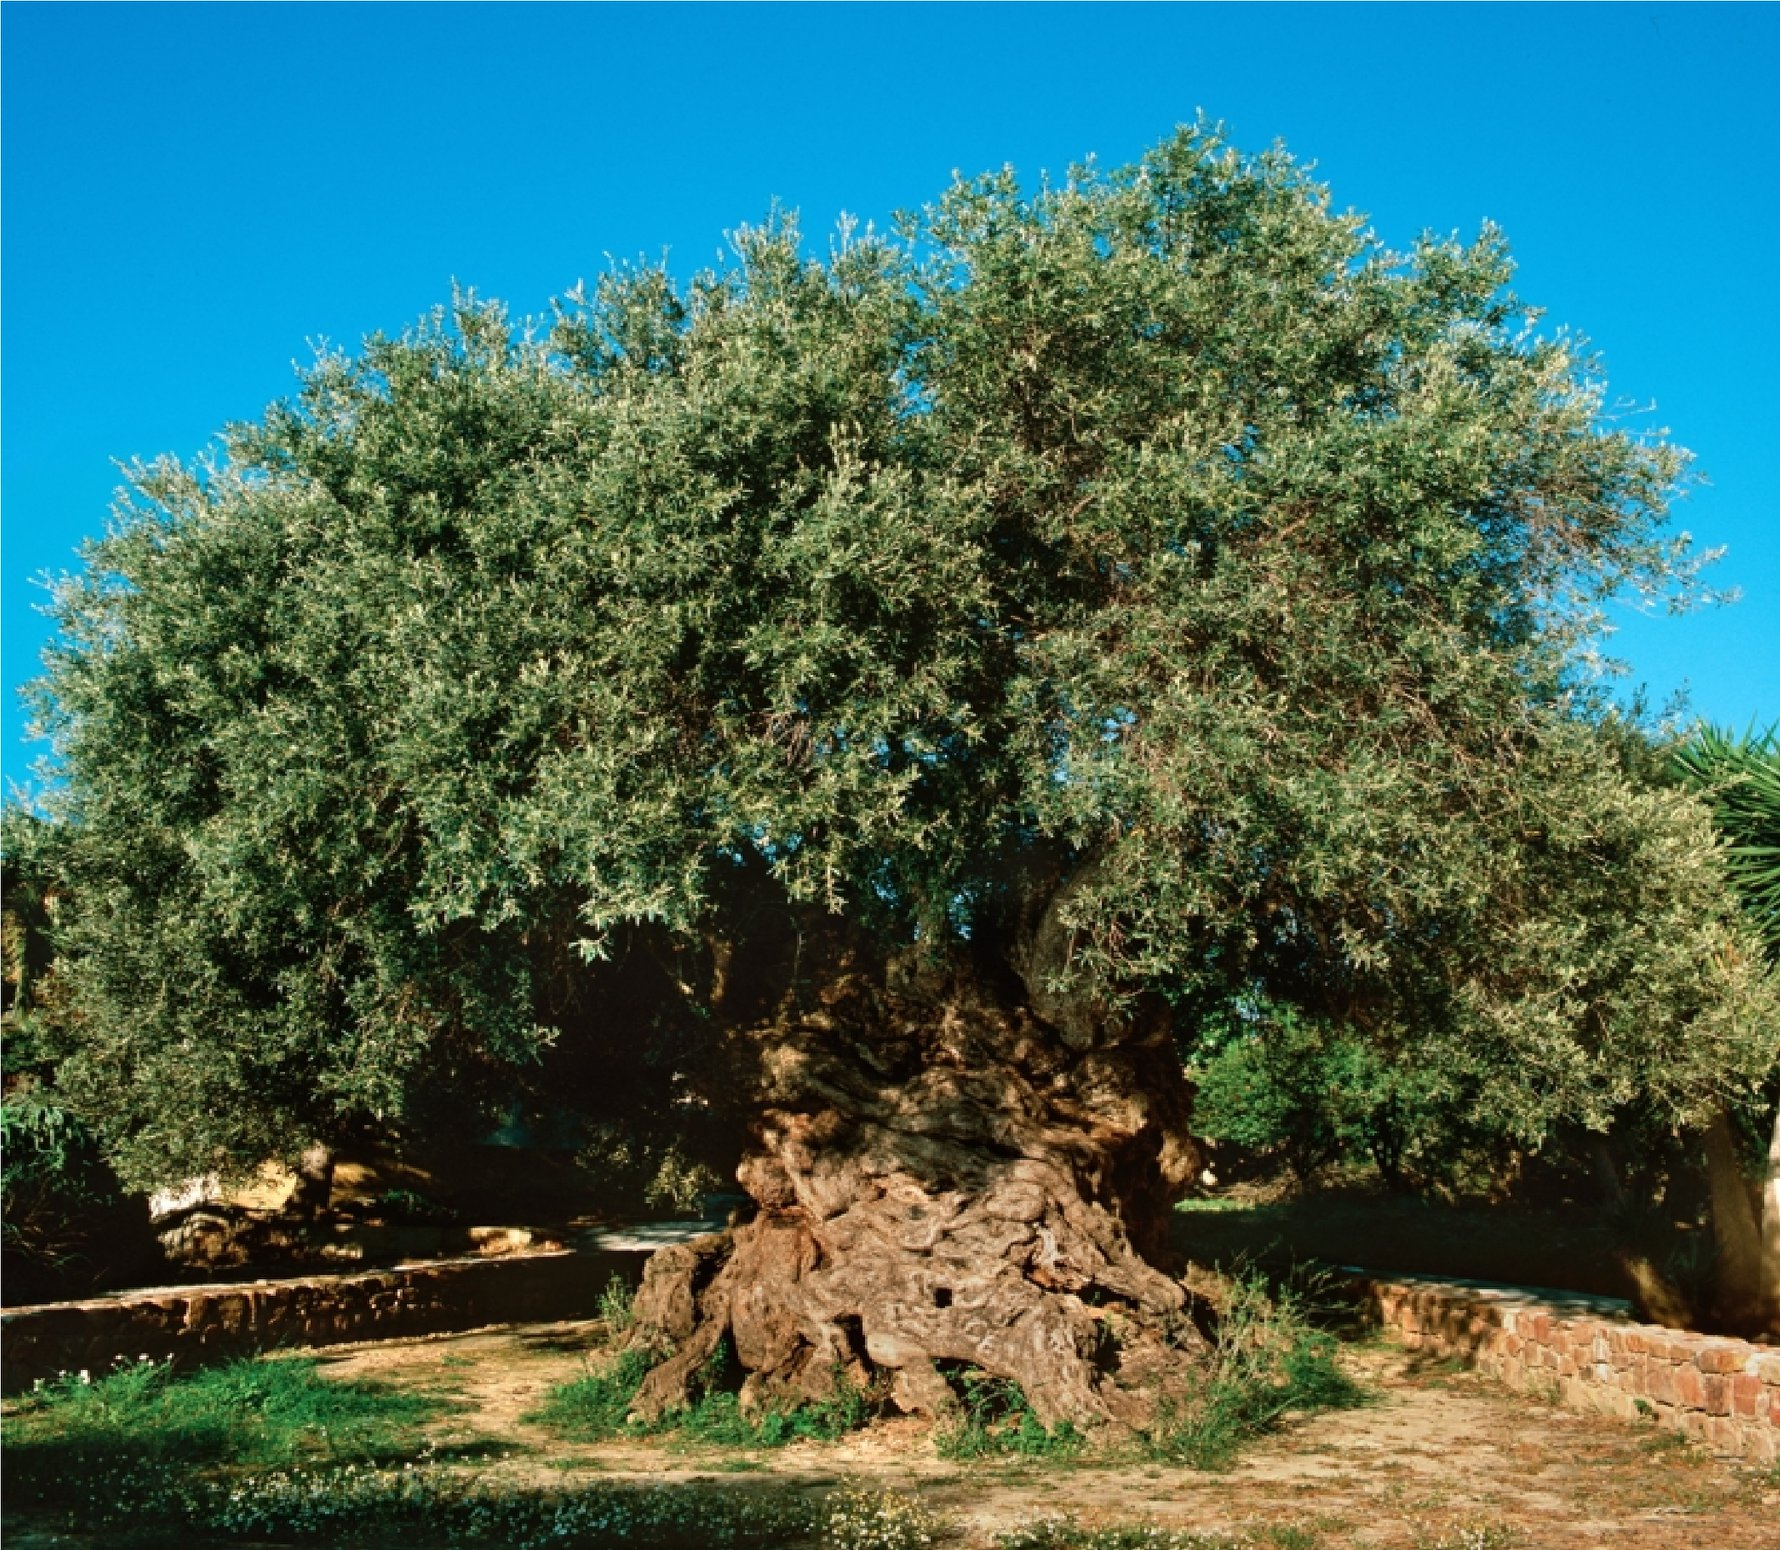 This Olive Tree in Greece is Considered the Oldest in the World With an Estimated Age of 4,000 years